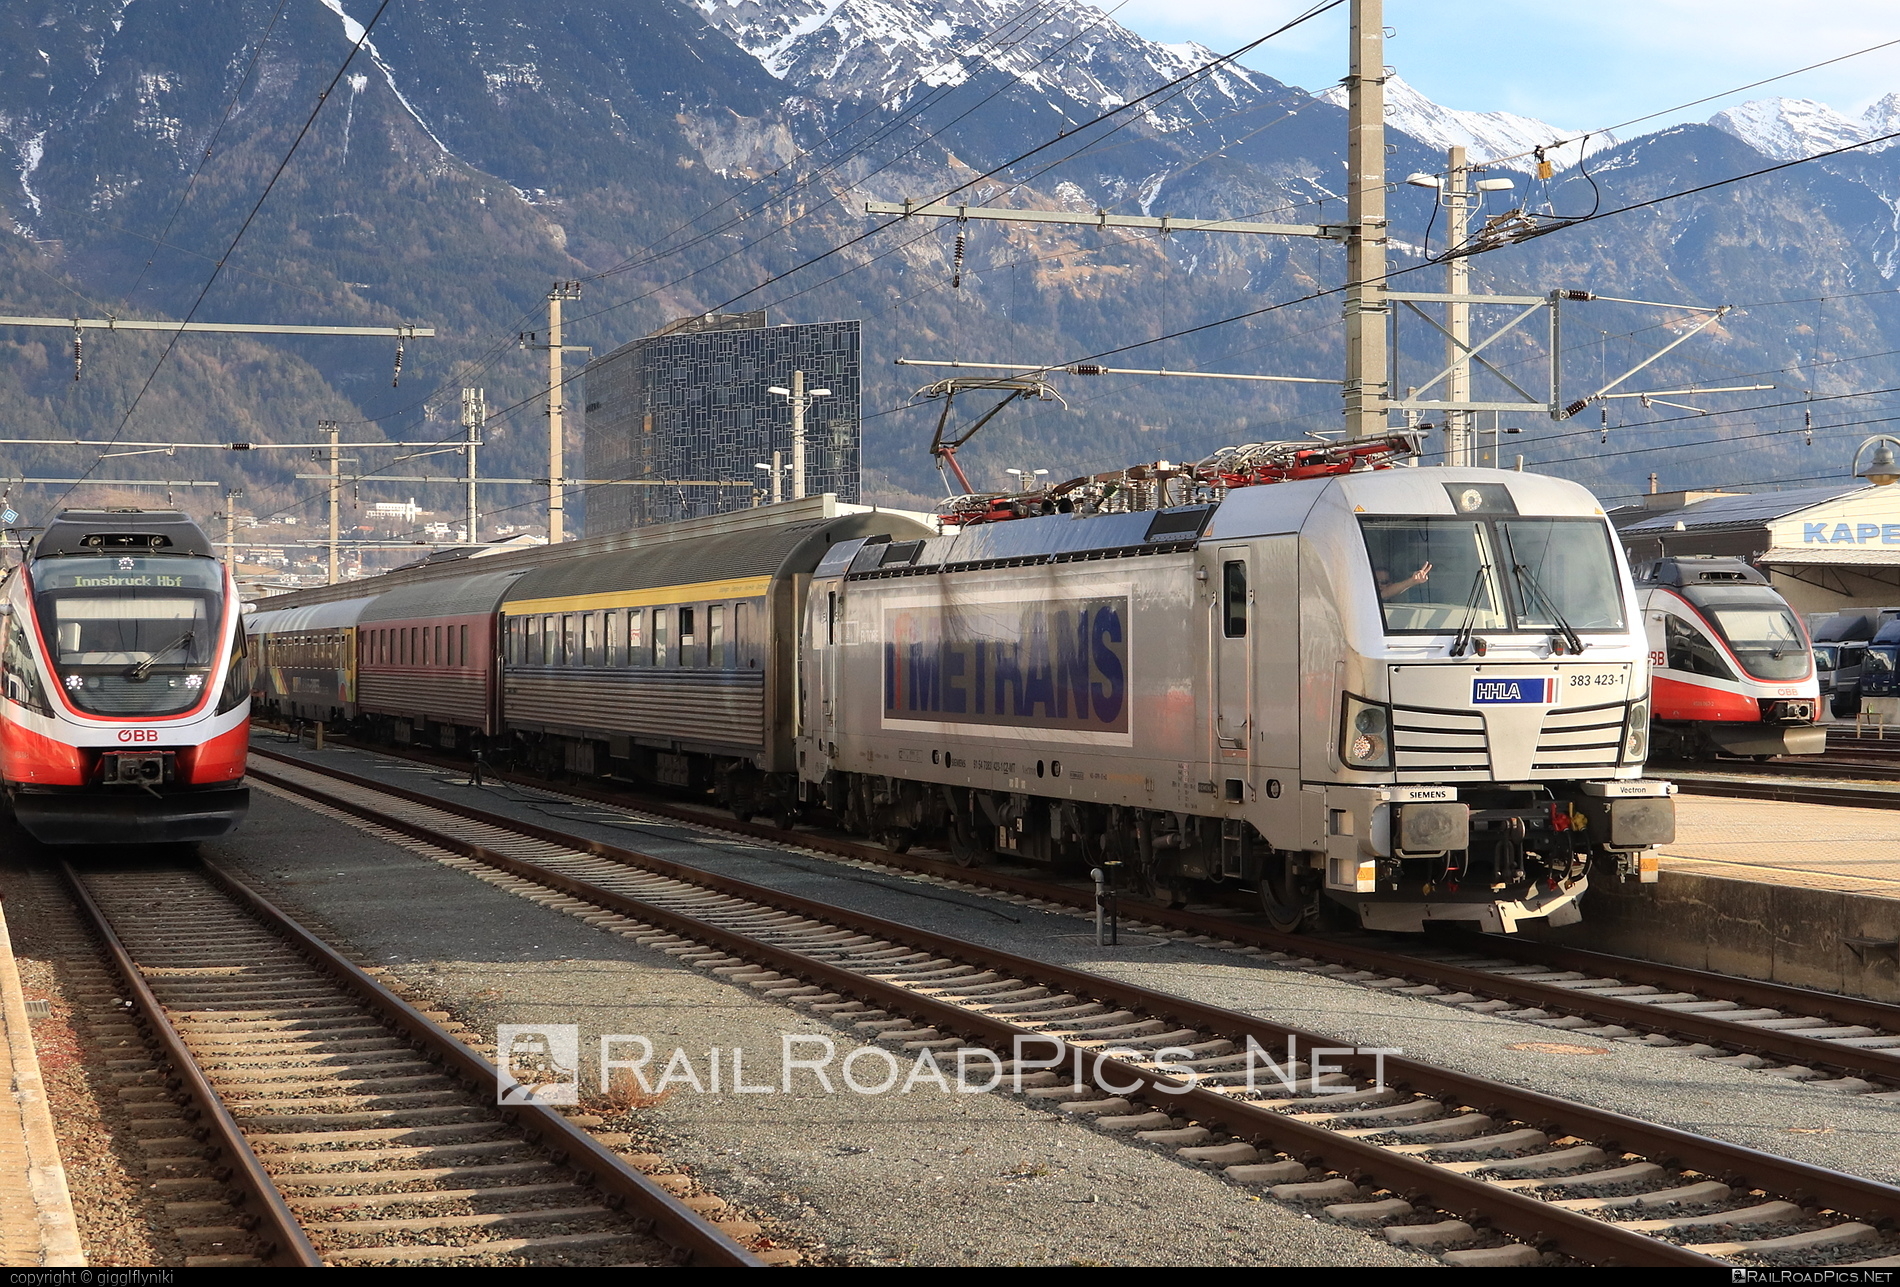 Siemens Vectron MS - 383 423-1 operated by METRANS, a.s. #hhla #metrans #siemens #siemensVectron #siemensVectronMS #urlaubsexpress #vectron #vectronMS